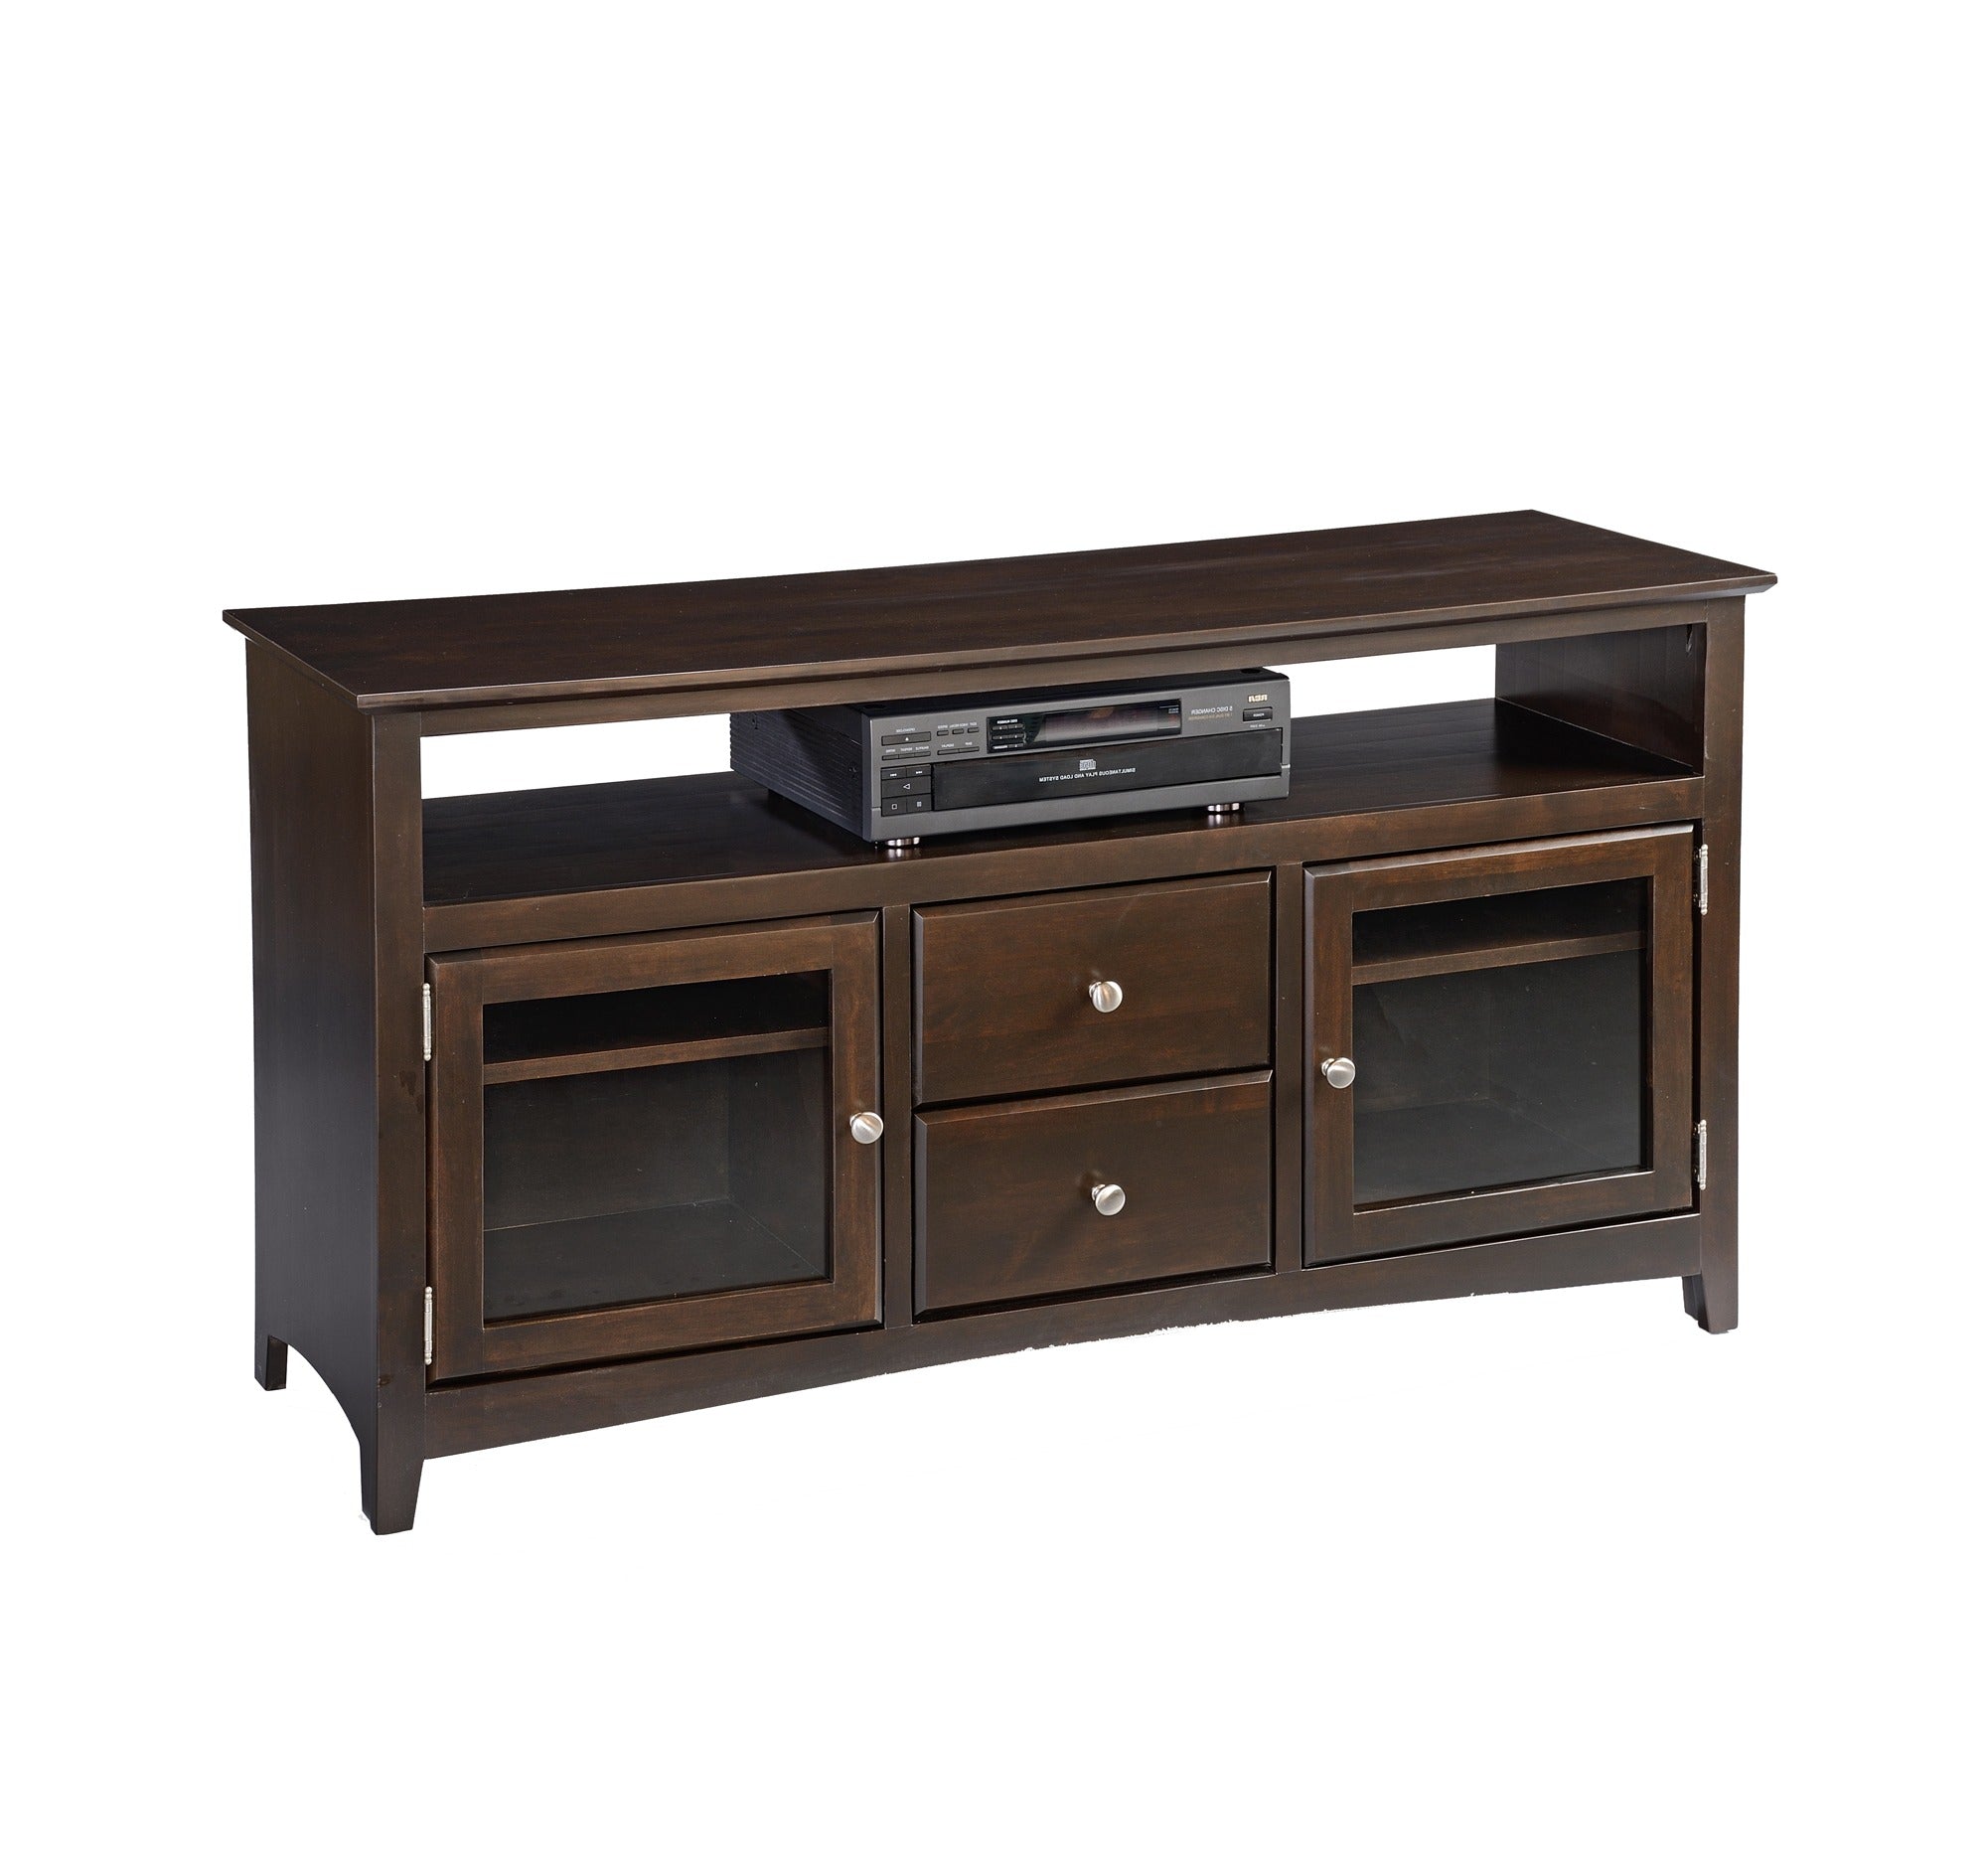 54" Entertainment Console - Rug & Home